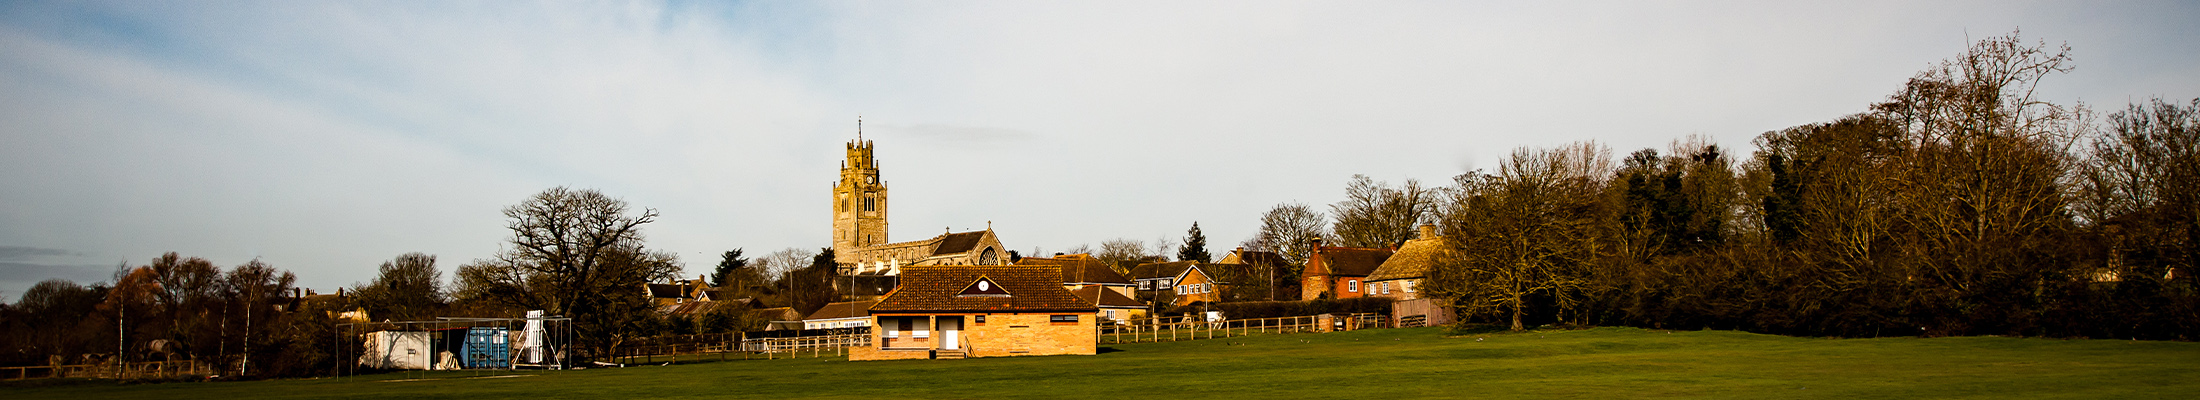 Cricket Pitch and Church